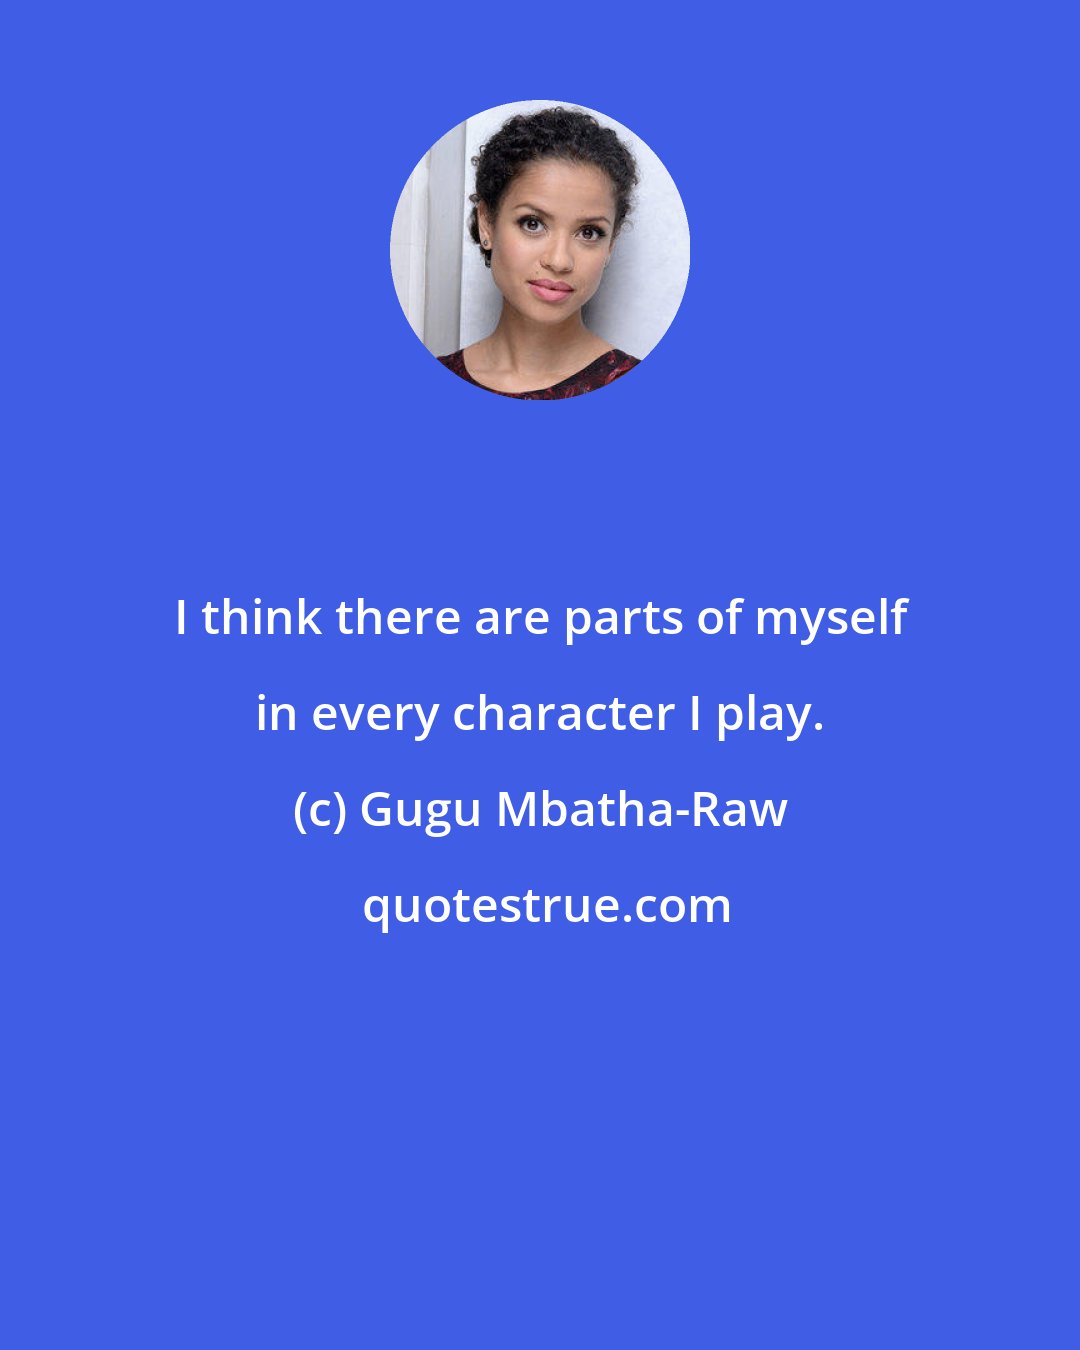 Gugu Mbatha-Raw: I think there are parts of myself in every character I play.